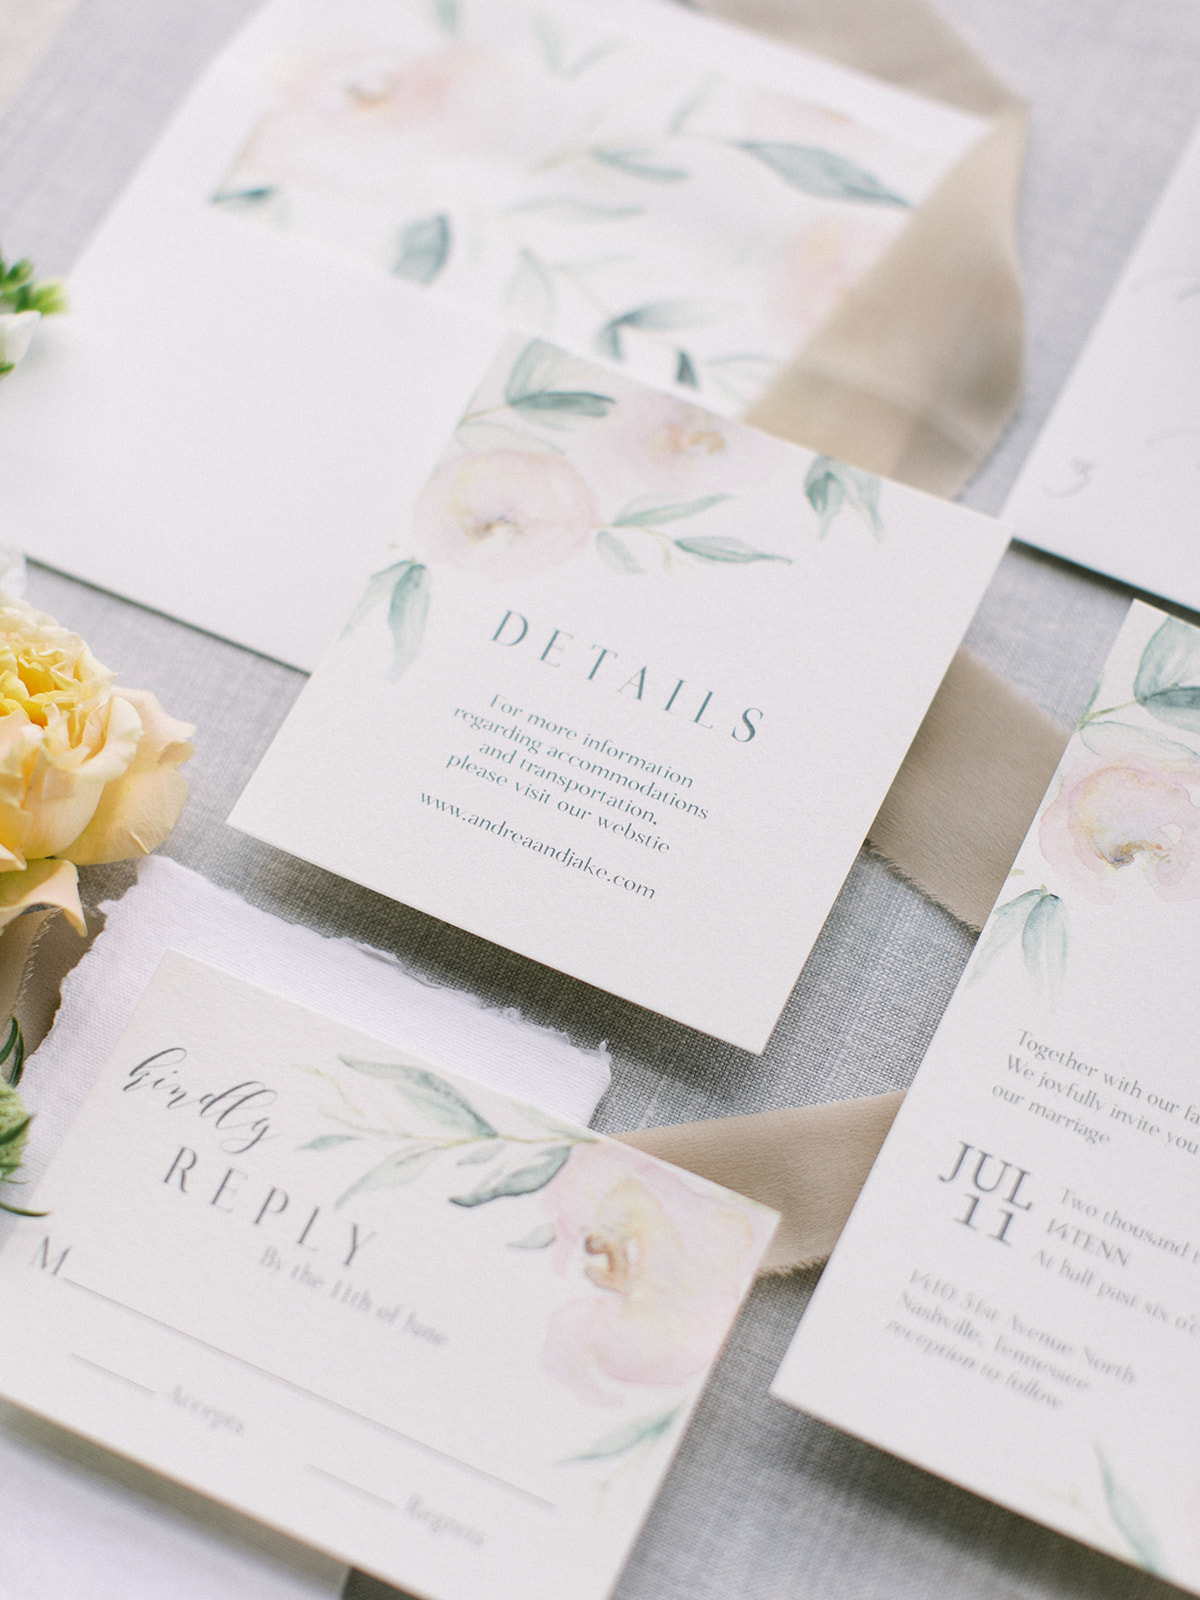 Floral wedding invitation design: Clean & Modern Styled Shoot at 14TENN featured on Nashville Bride Guide